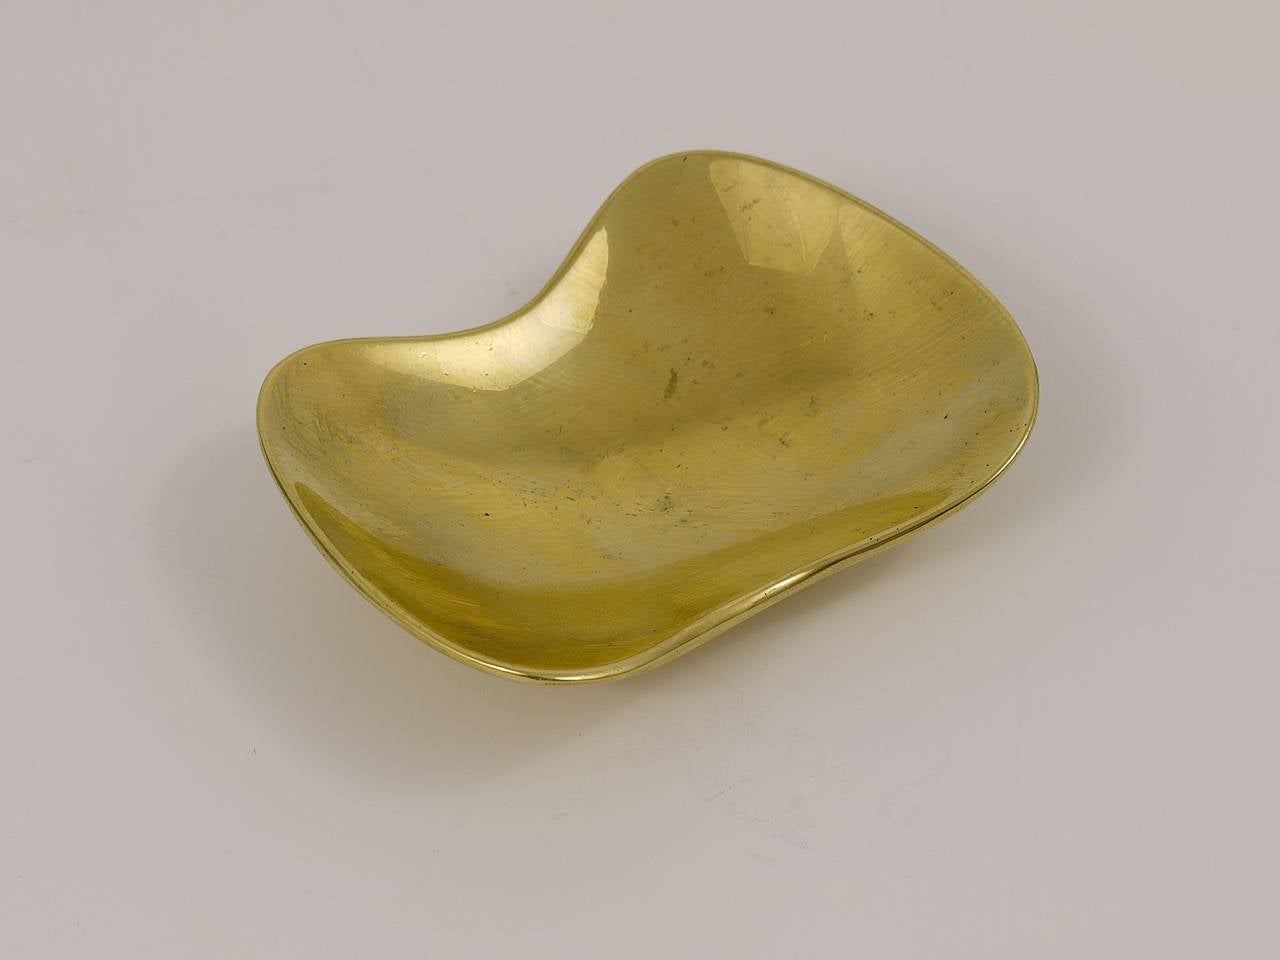 A very beautiful brass ashtray from the 1950s. Designed and executed by Carl Aubock, Vienna. In very good condition with nice patina on the brass. Marked.